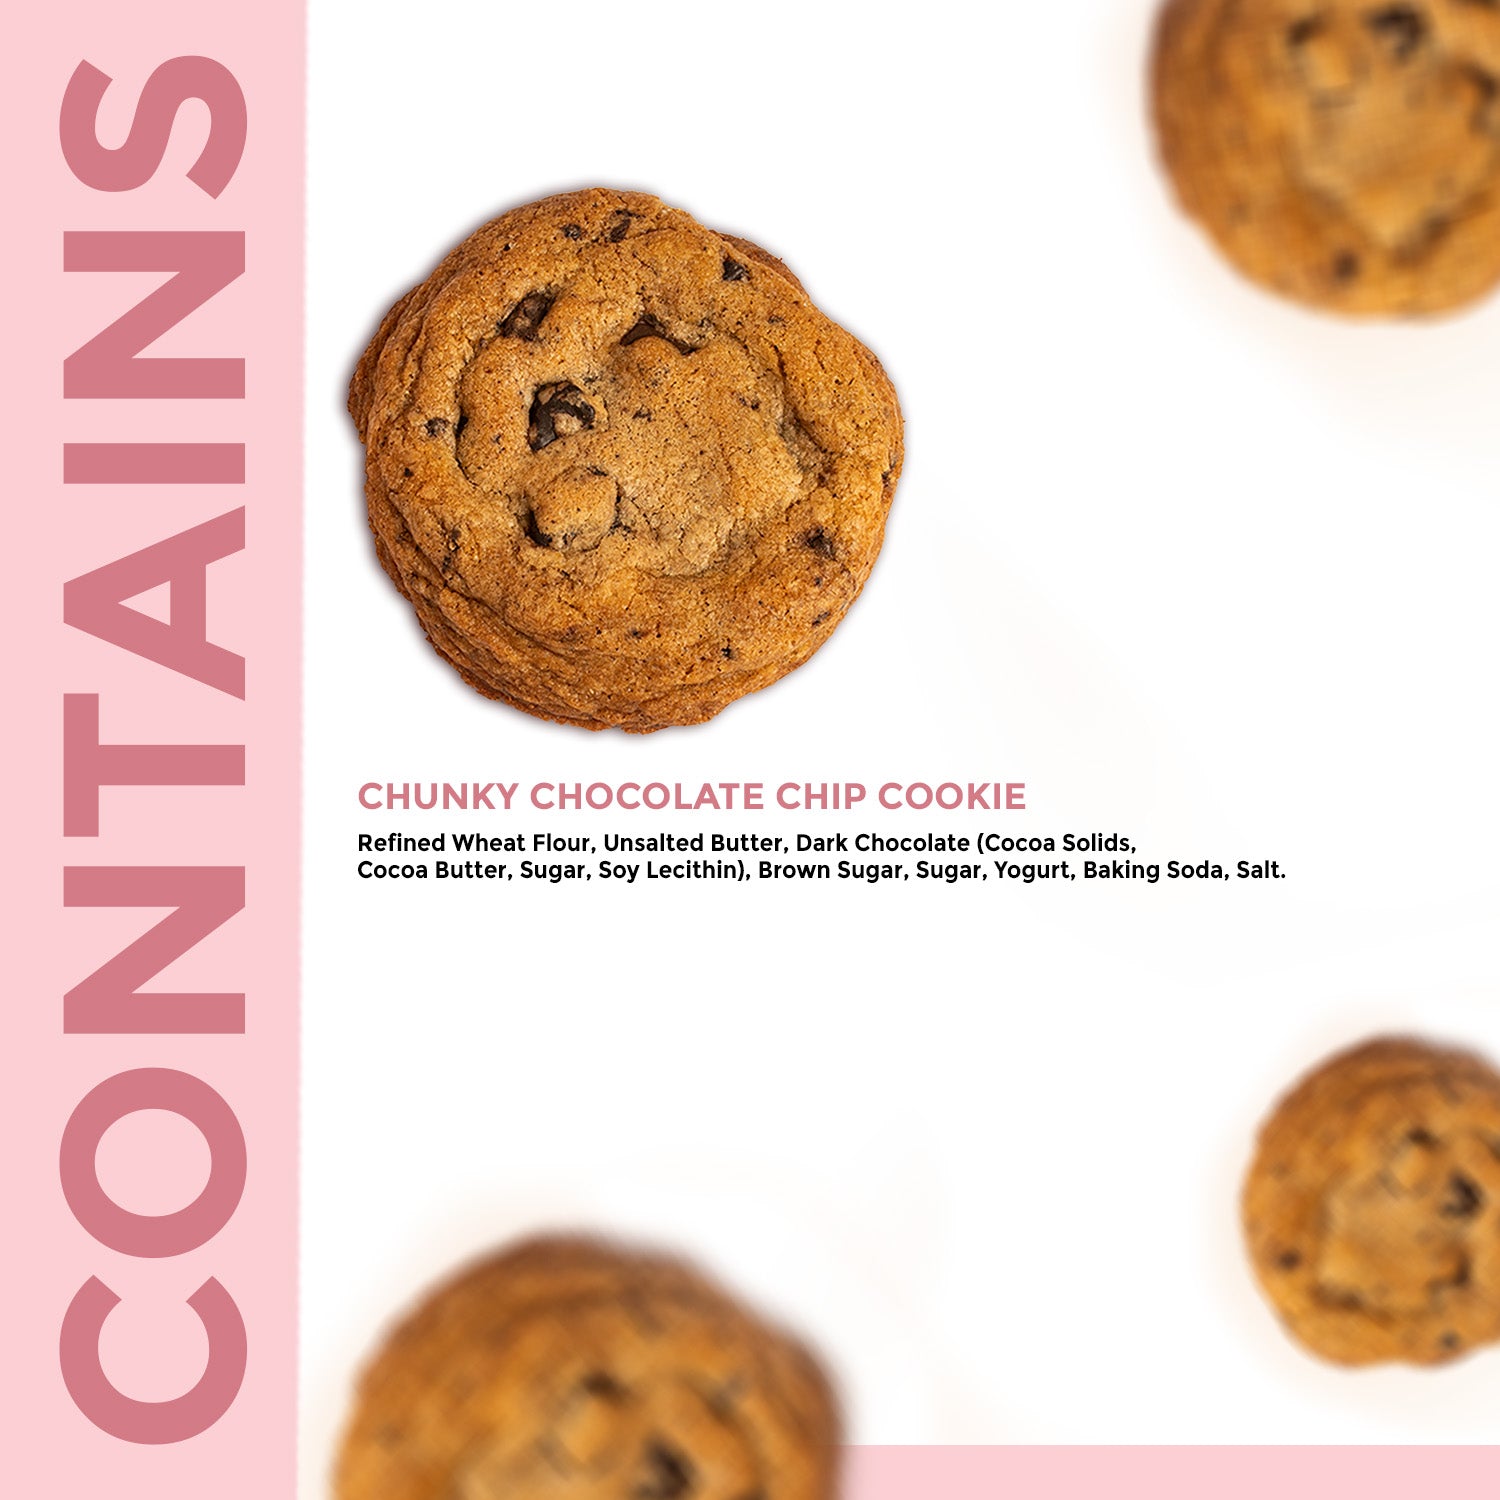 Cocosutra Chunky Chocolate Chip Cookies - Freshly Baked - Eggless